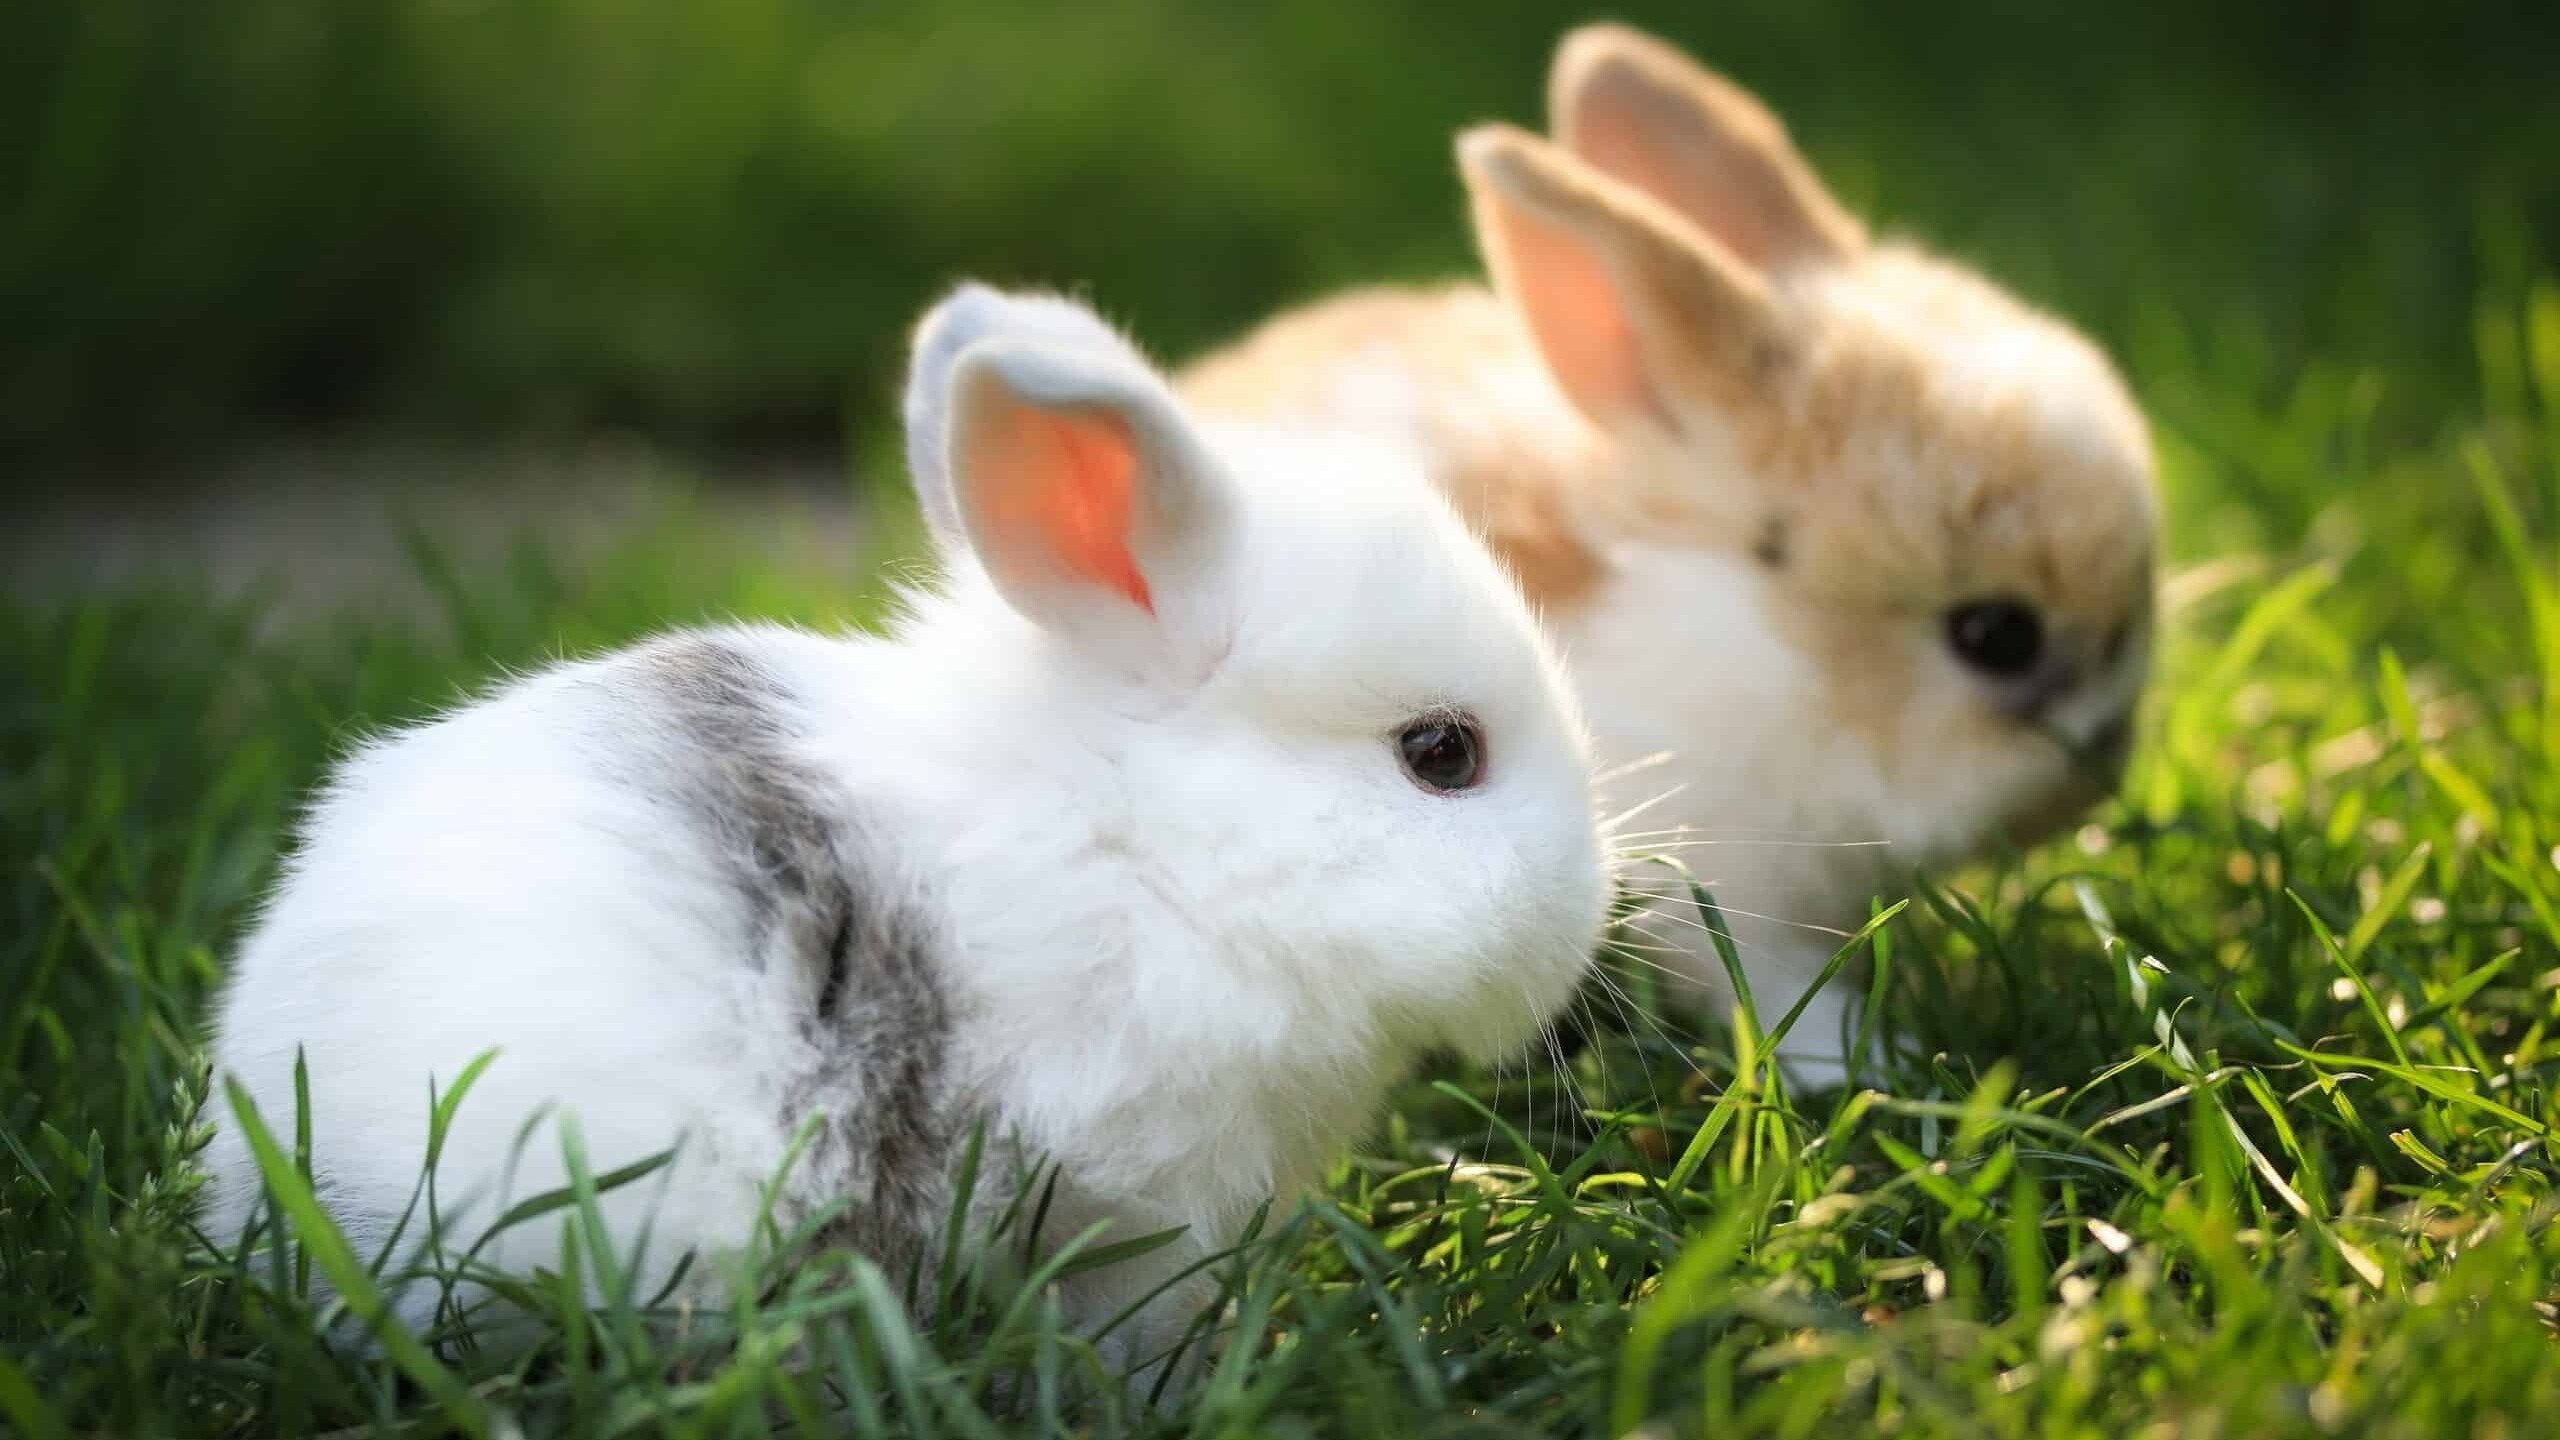 Cute Bunny Pictures  Download Free Images on Unsplash